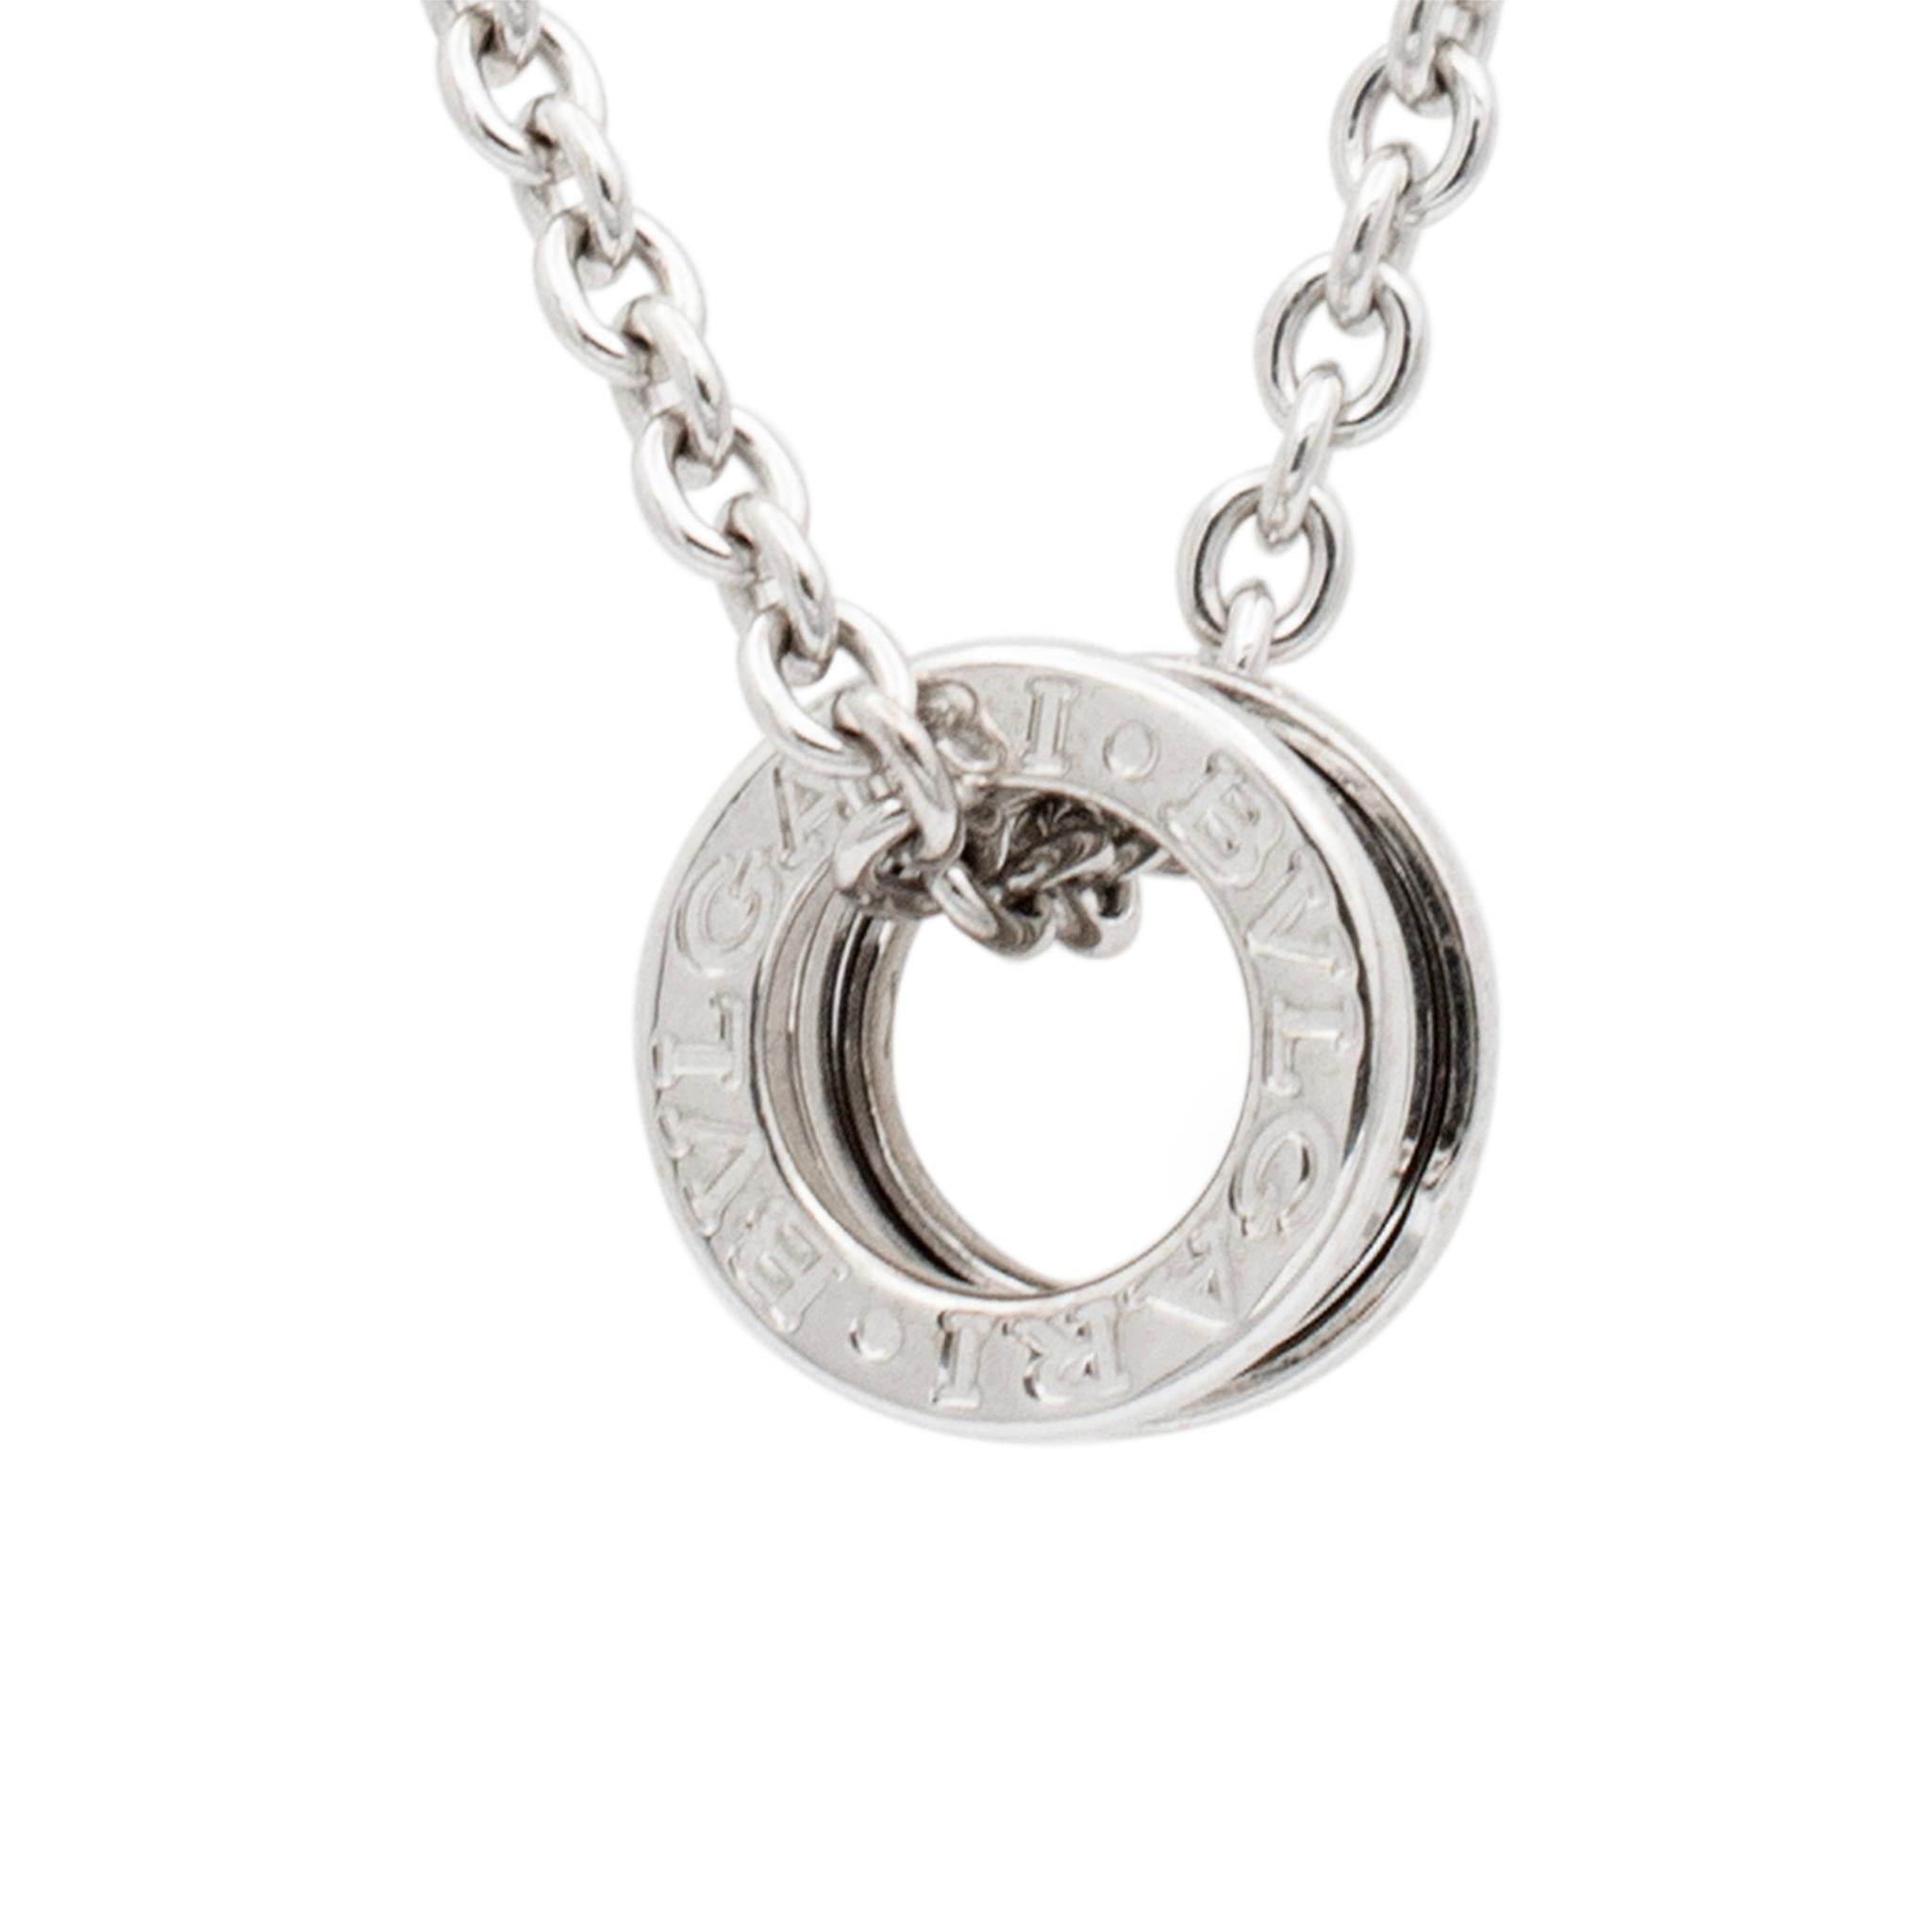 Brand: Bvlgari

Gender: Ladies

Metal Type: ﻿18K White Gold

Length: ﻿19.00 inches

Width: 3.40mm

Diameter: 13.10mm

Weight: 28.22 grams

18K white gold single strand collar necklace. Engraved with 